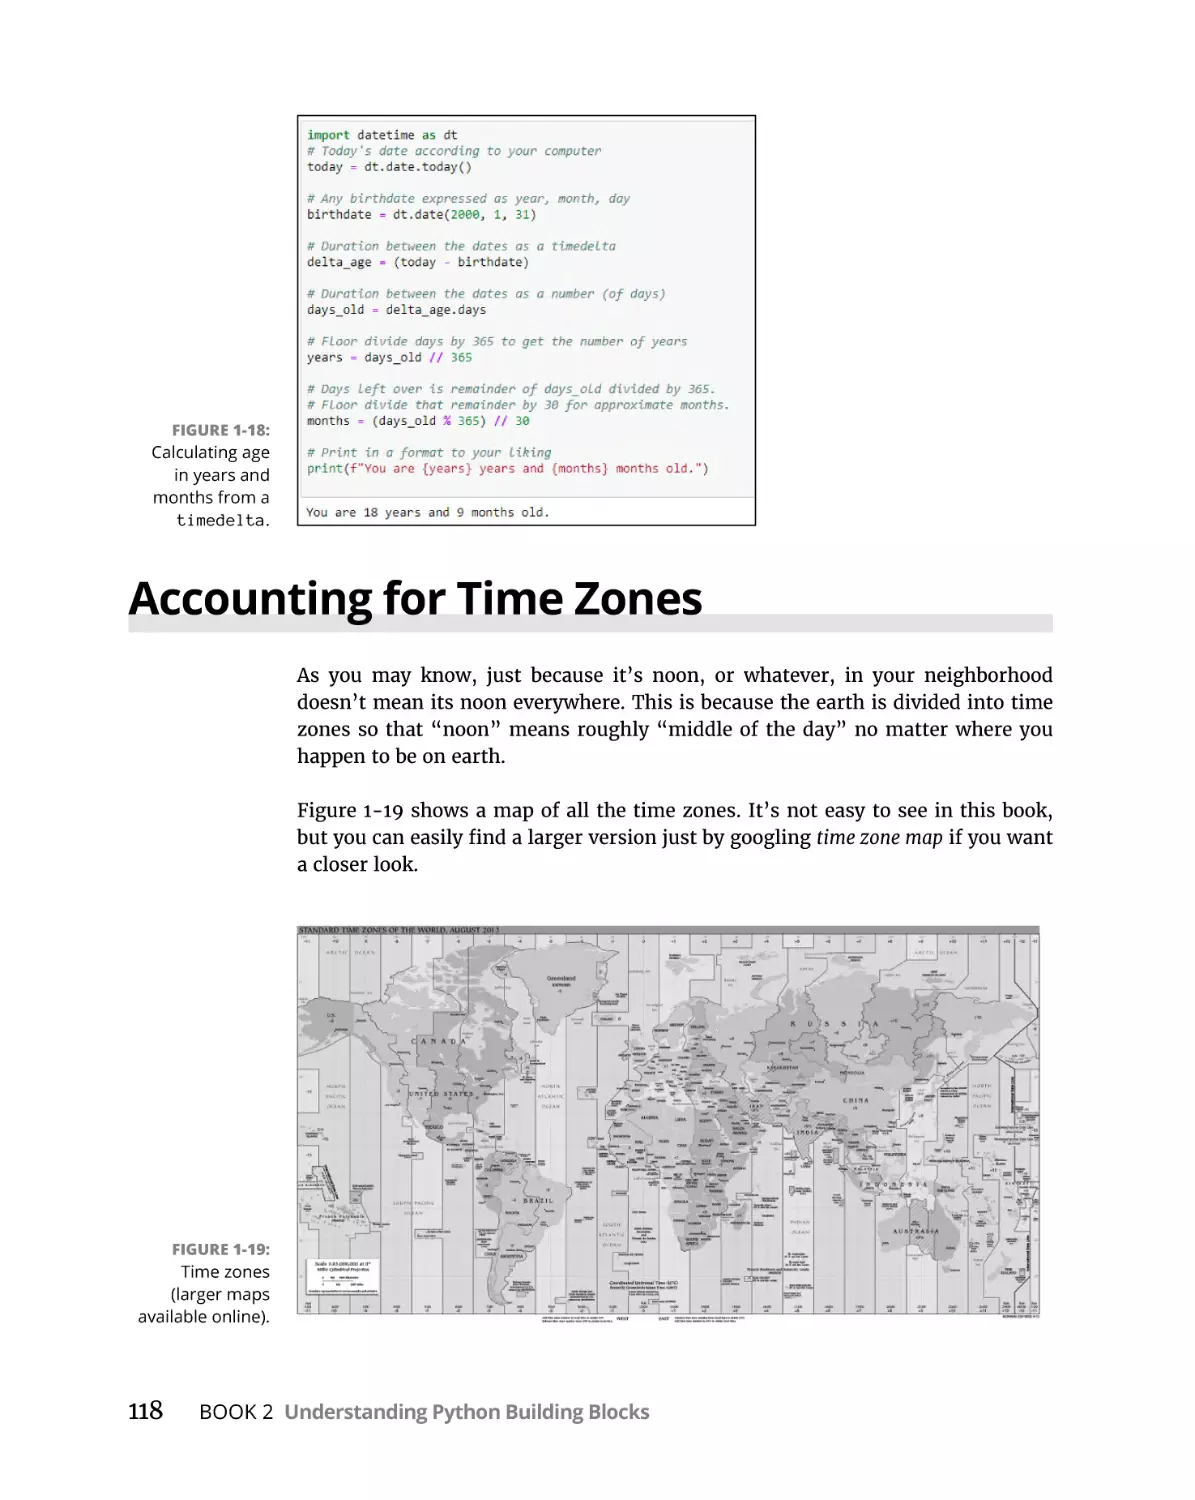 Accounting for Time Zones